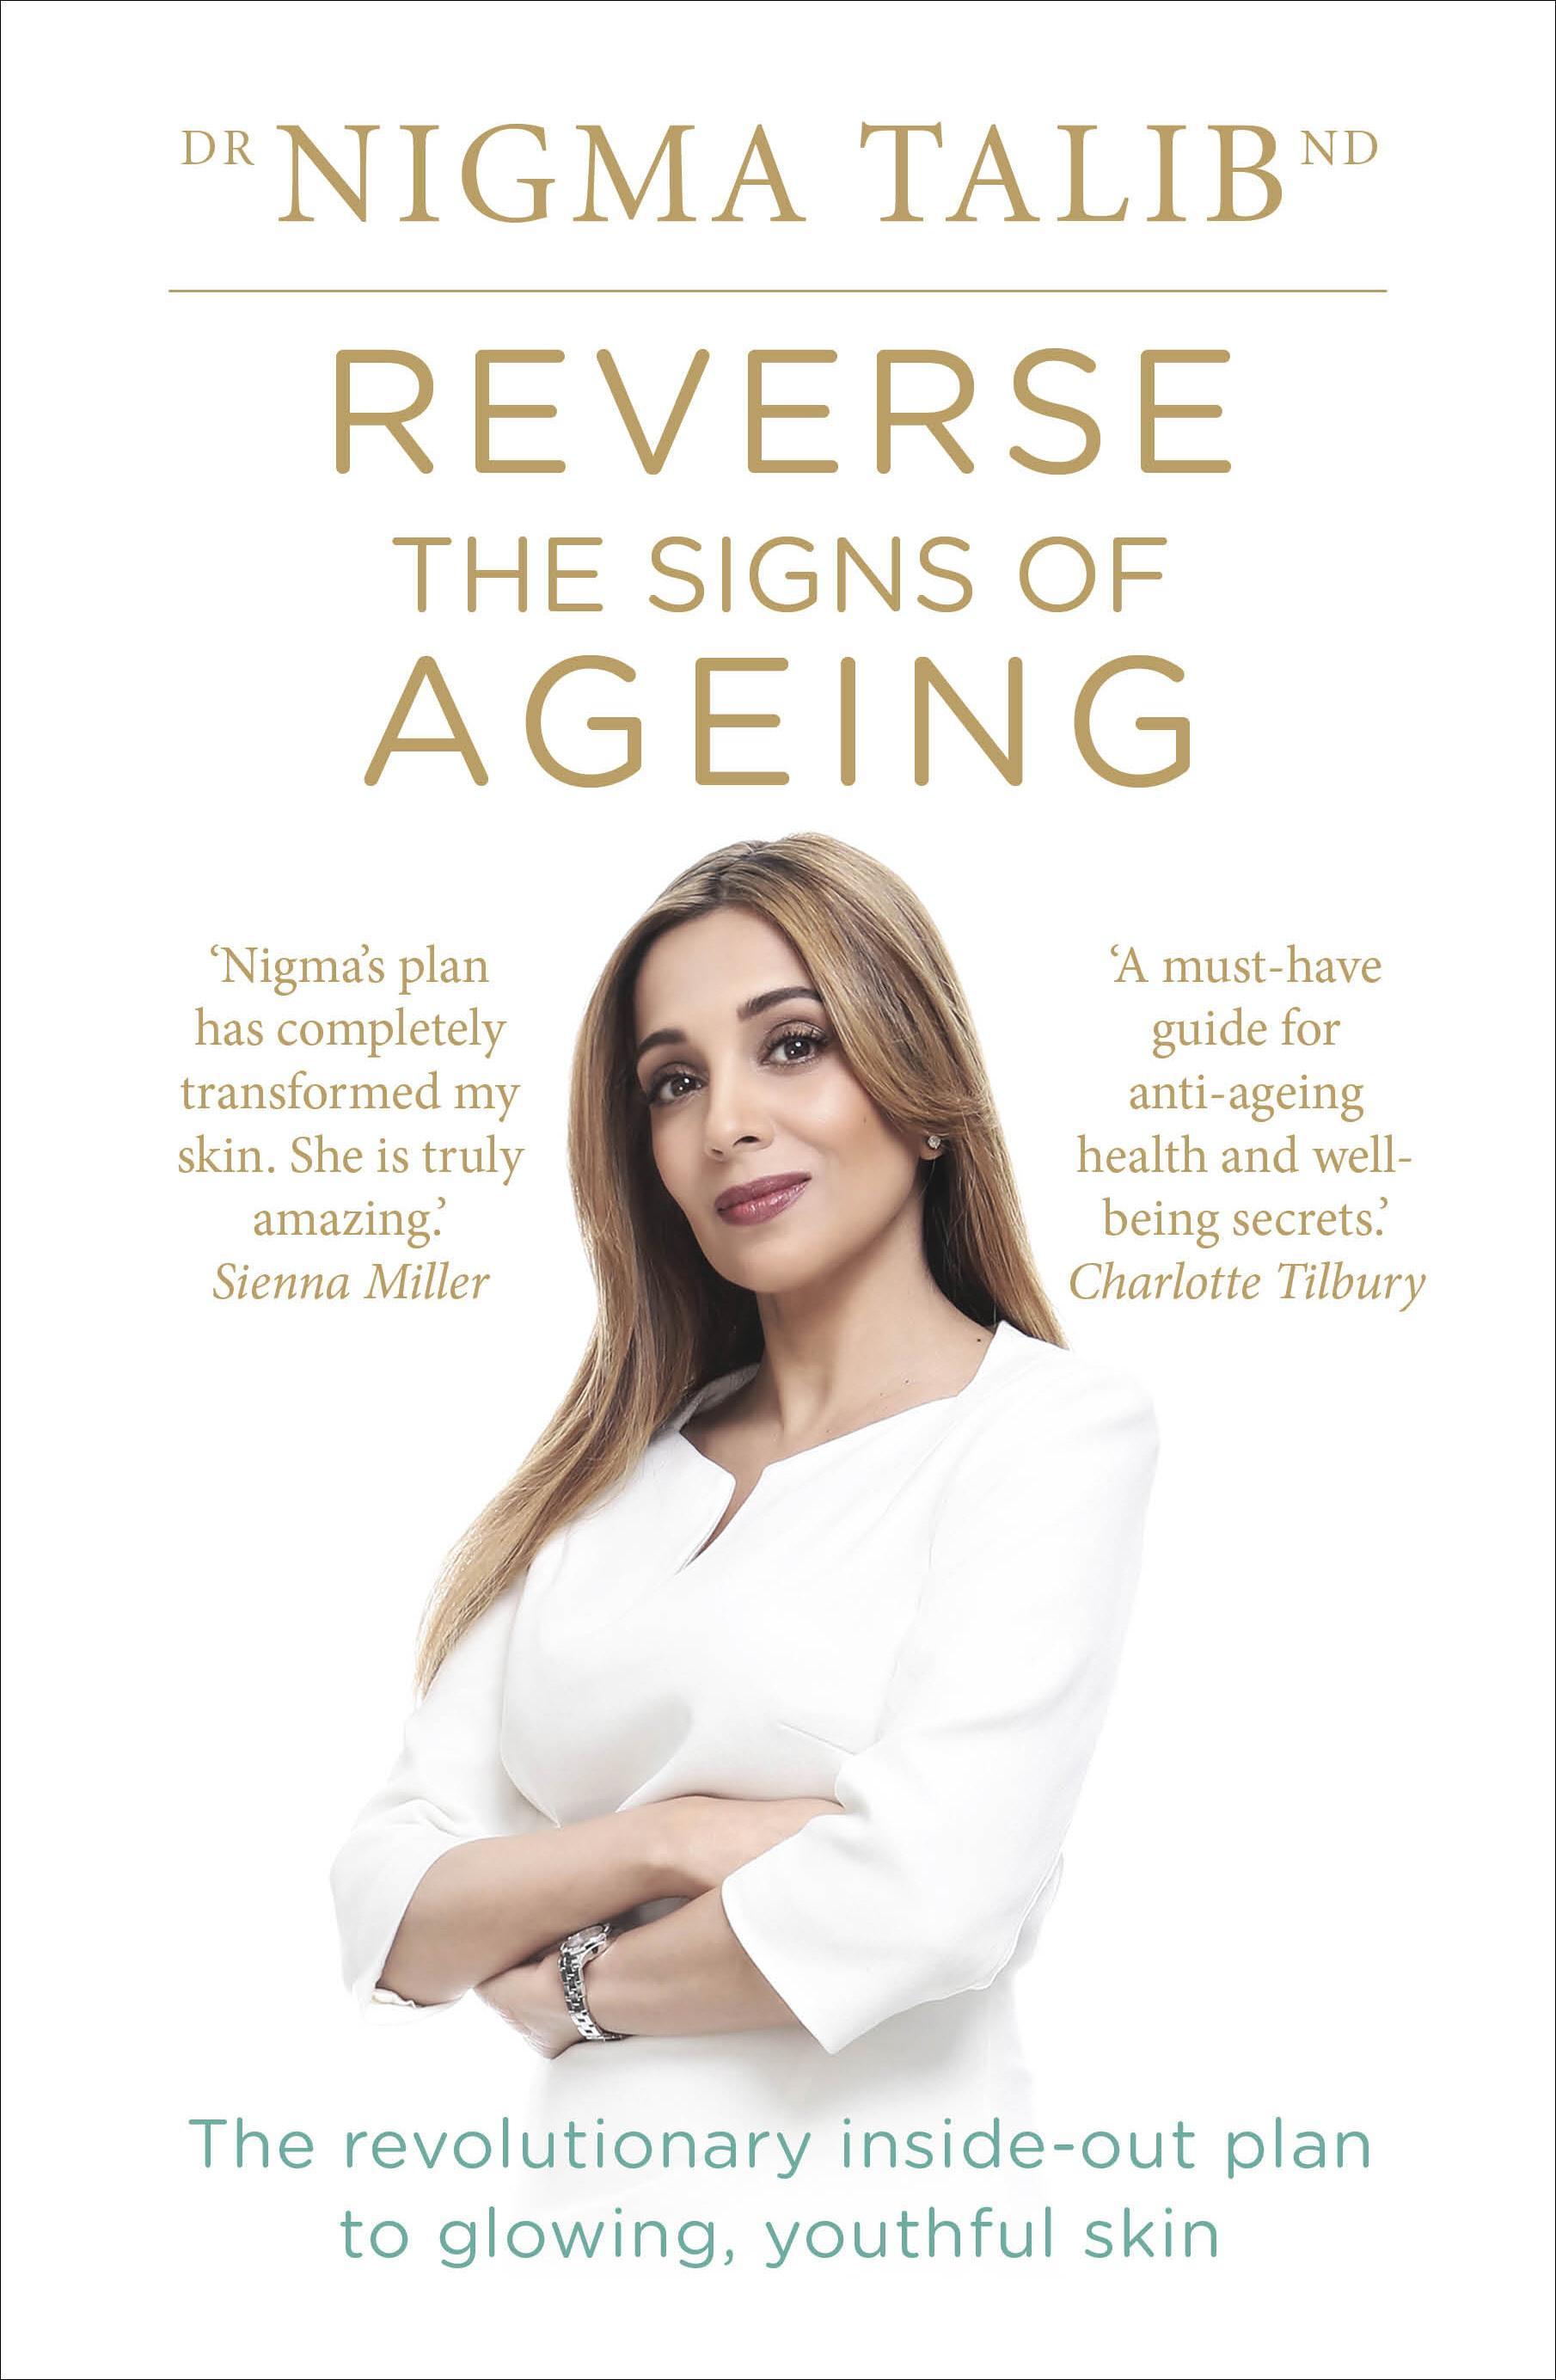 Reverse the Signs of Ageing - Dr Nigma Talib